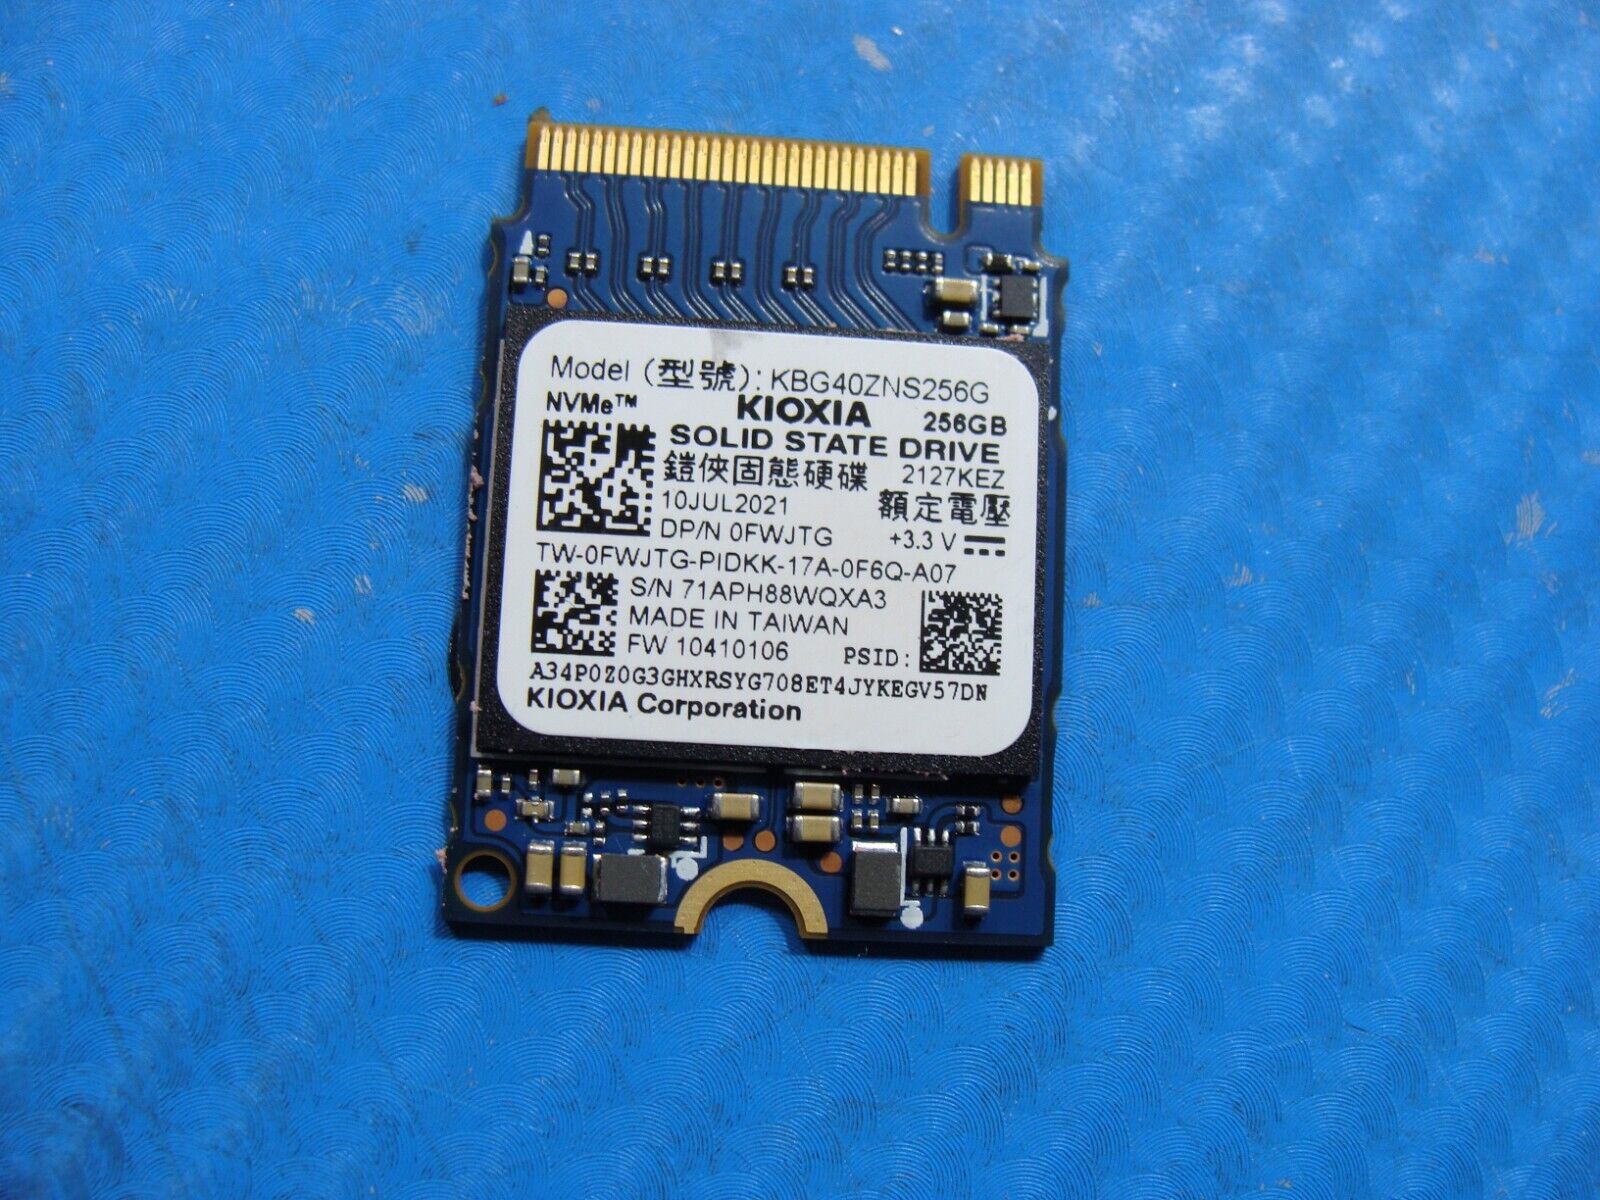 Dell 5420 Kioxia 256GB NVMe M.2 SSD Solid State Drive KBG40ZNS256G FWJTG